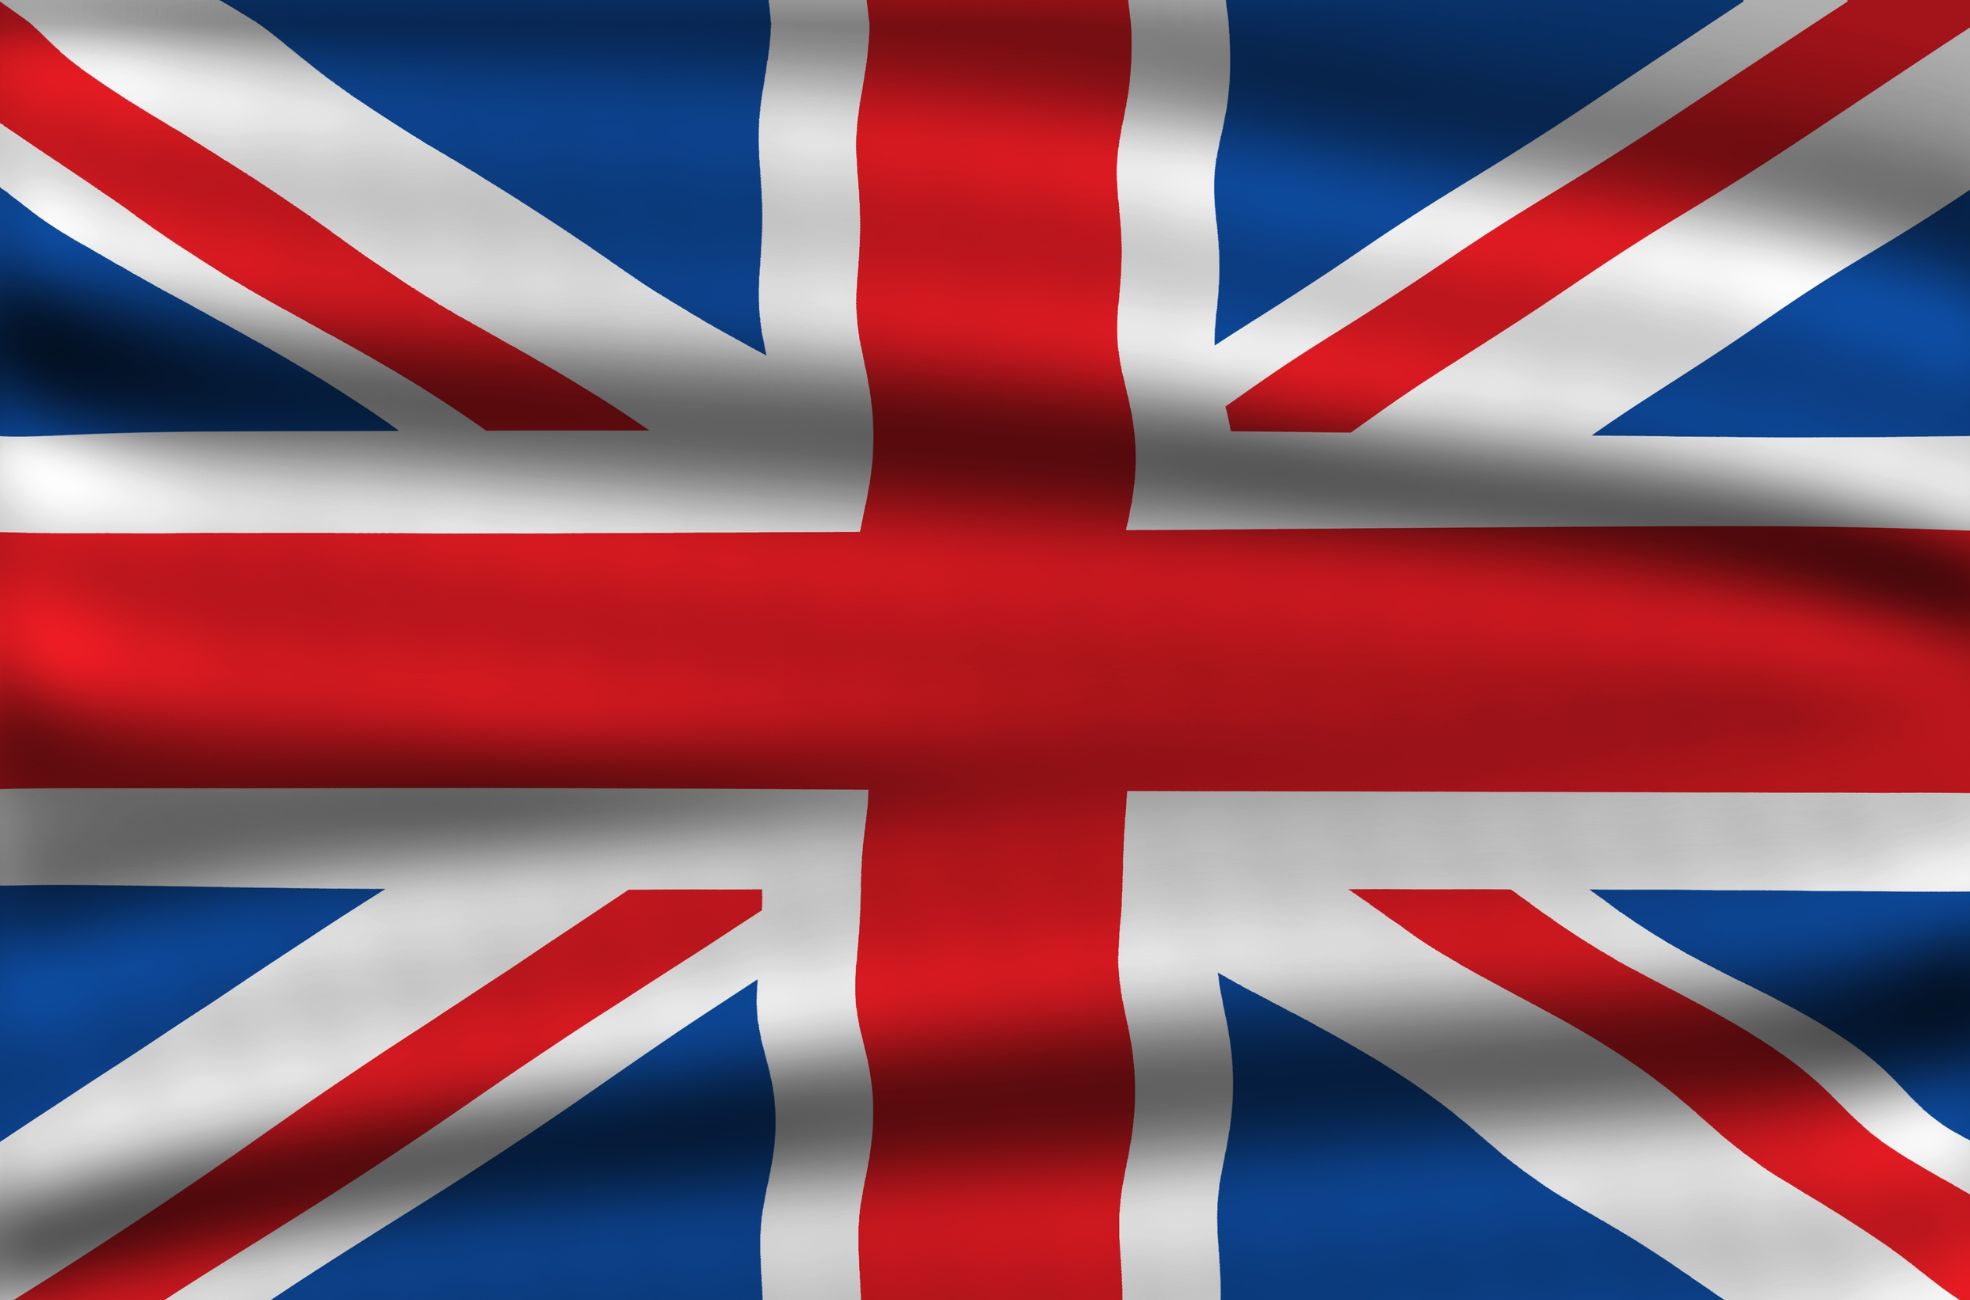 Flag Of The UK